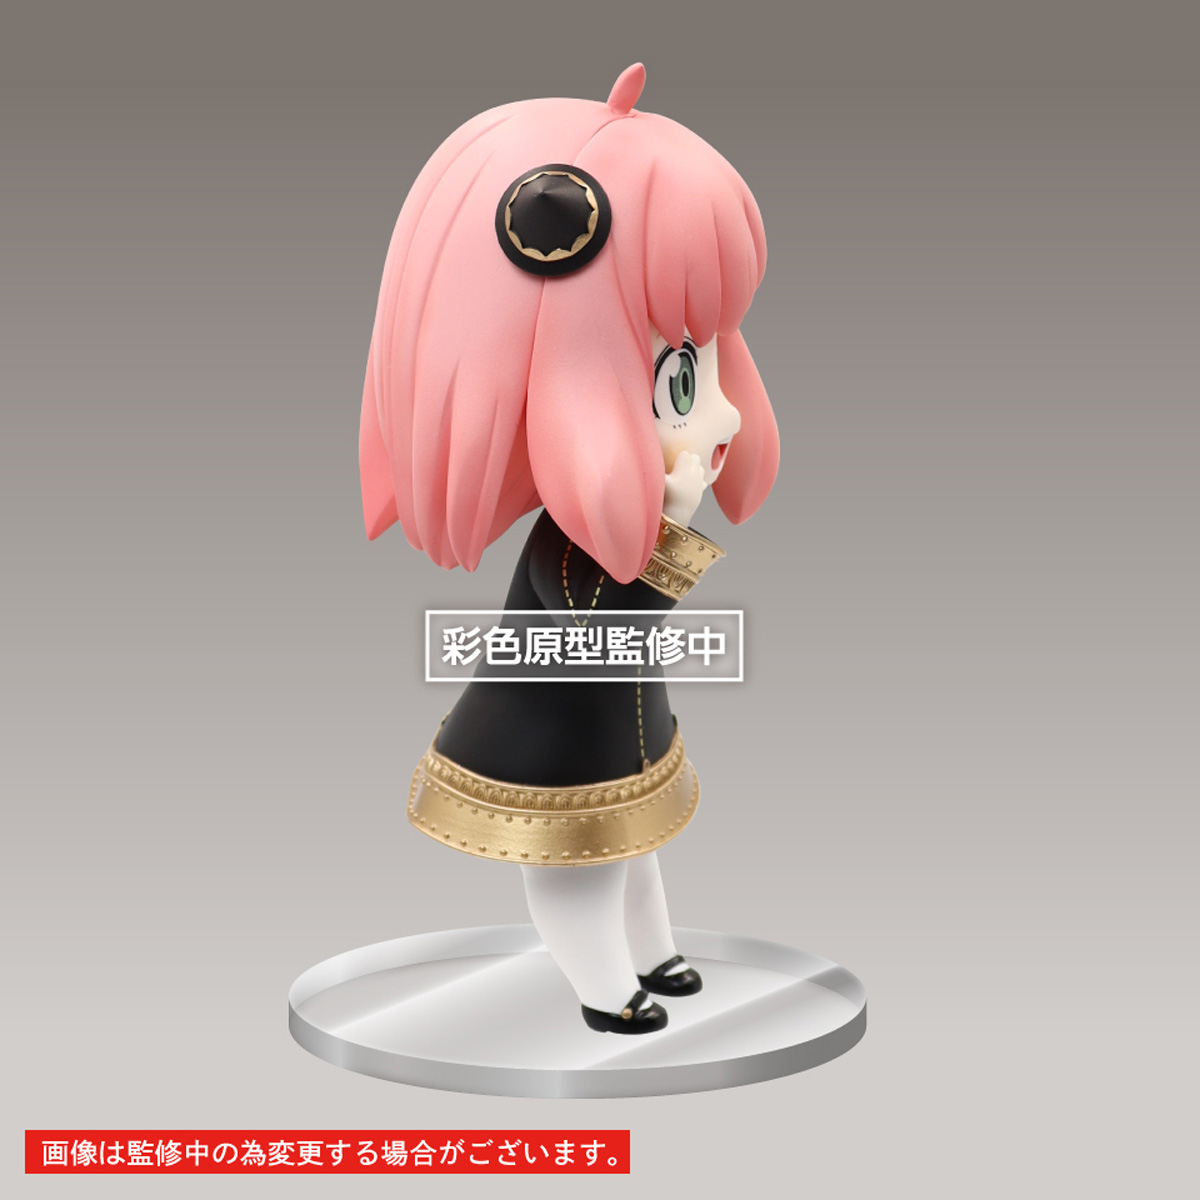 Spy x Family - Anya Forger Renewal Edition (Original Ver.) Puchieete Figure image count 5